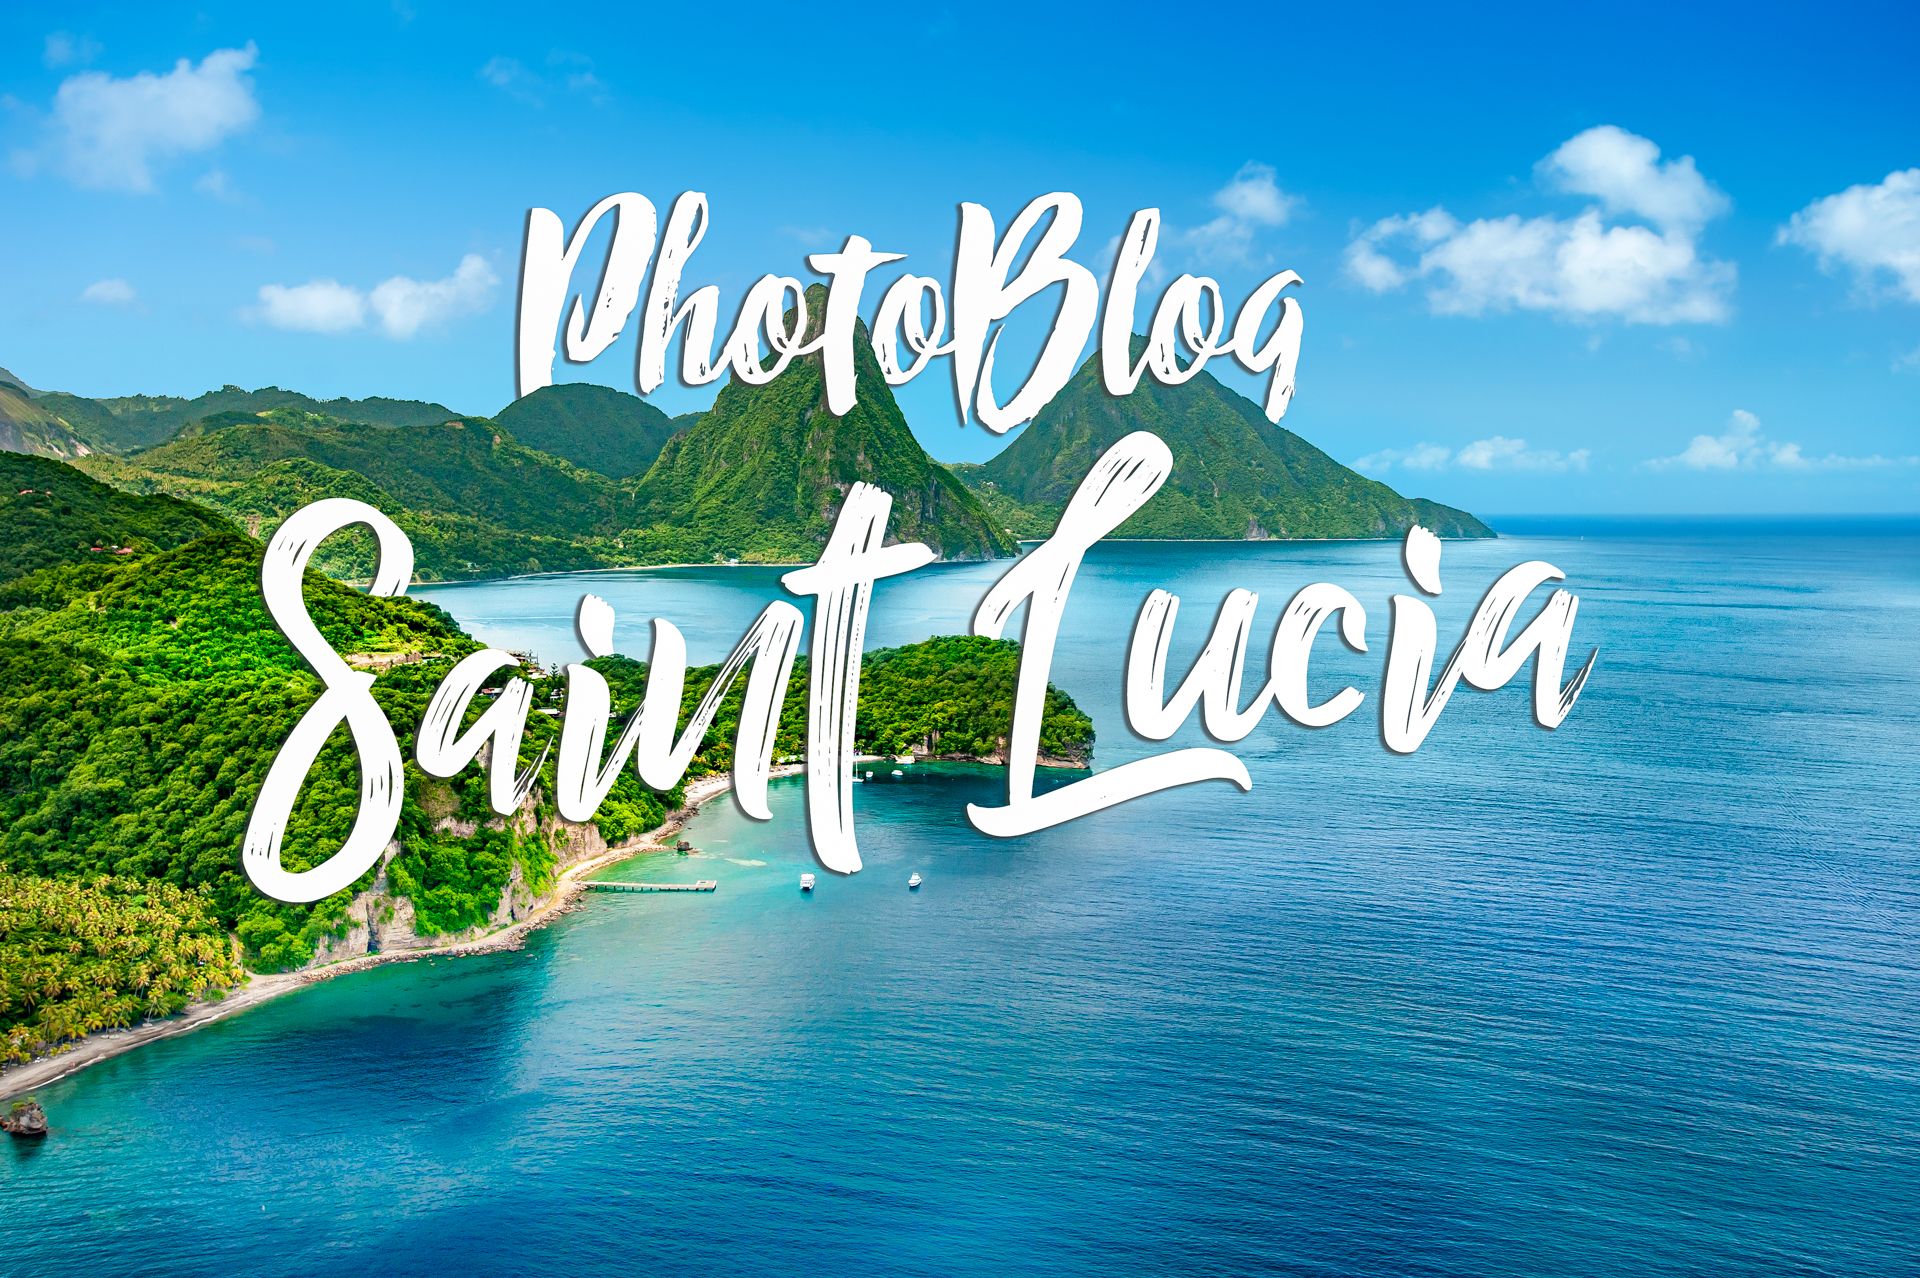 23 Pictures That Will Make You Fall In Love With Saint Lucia